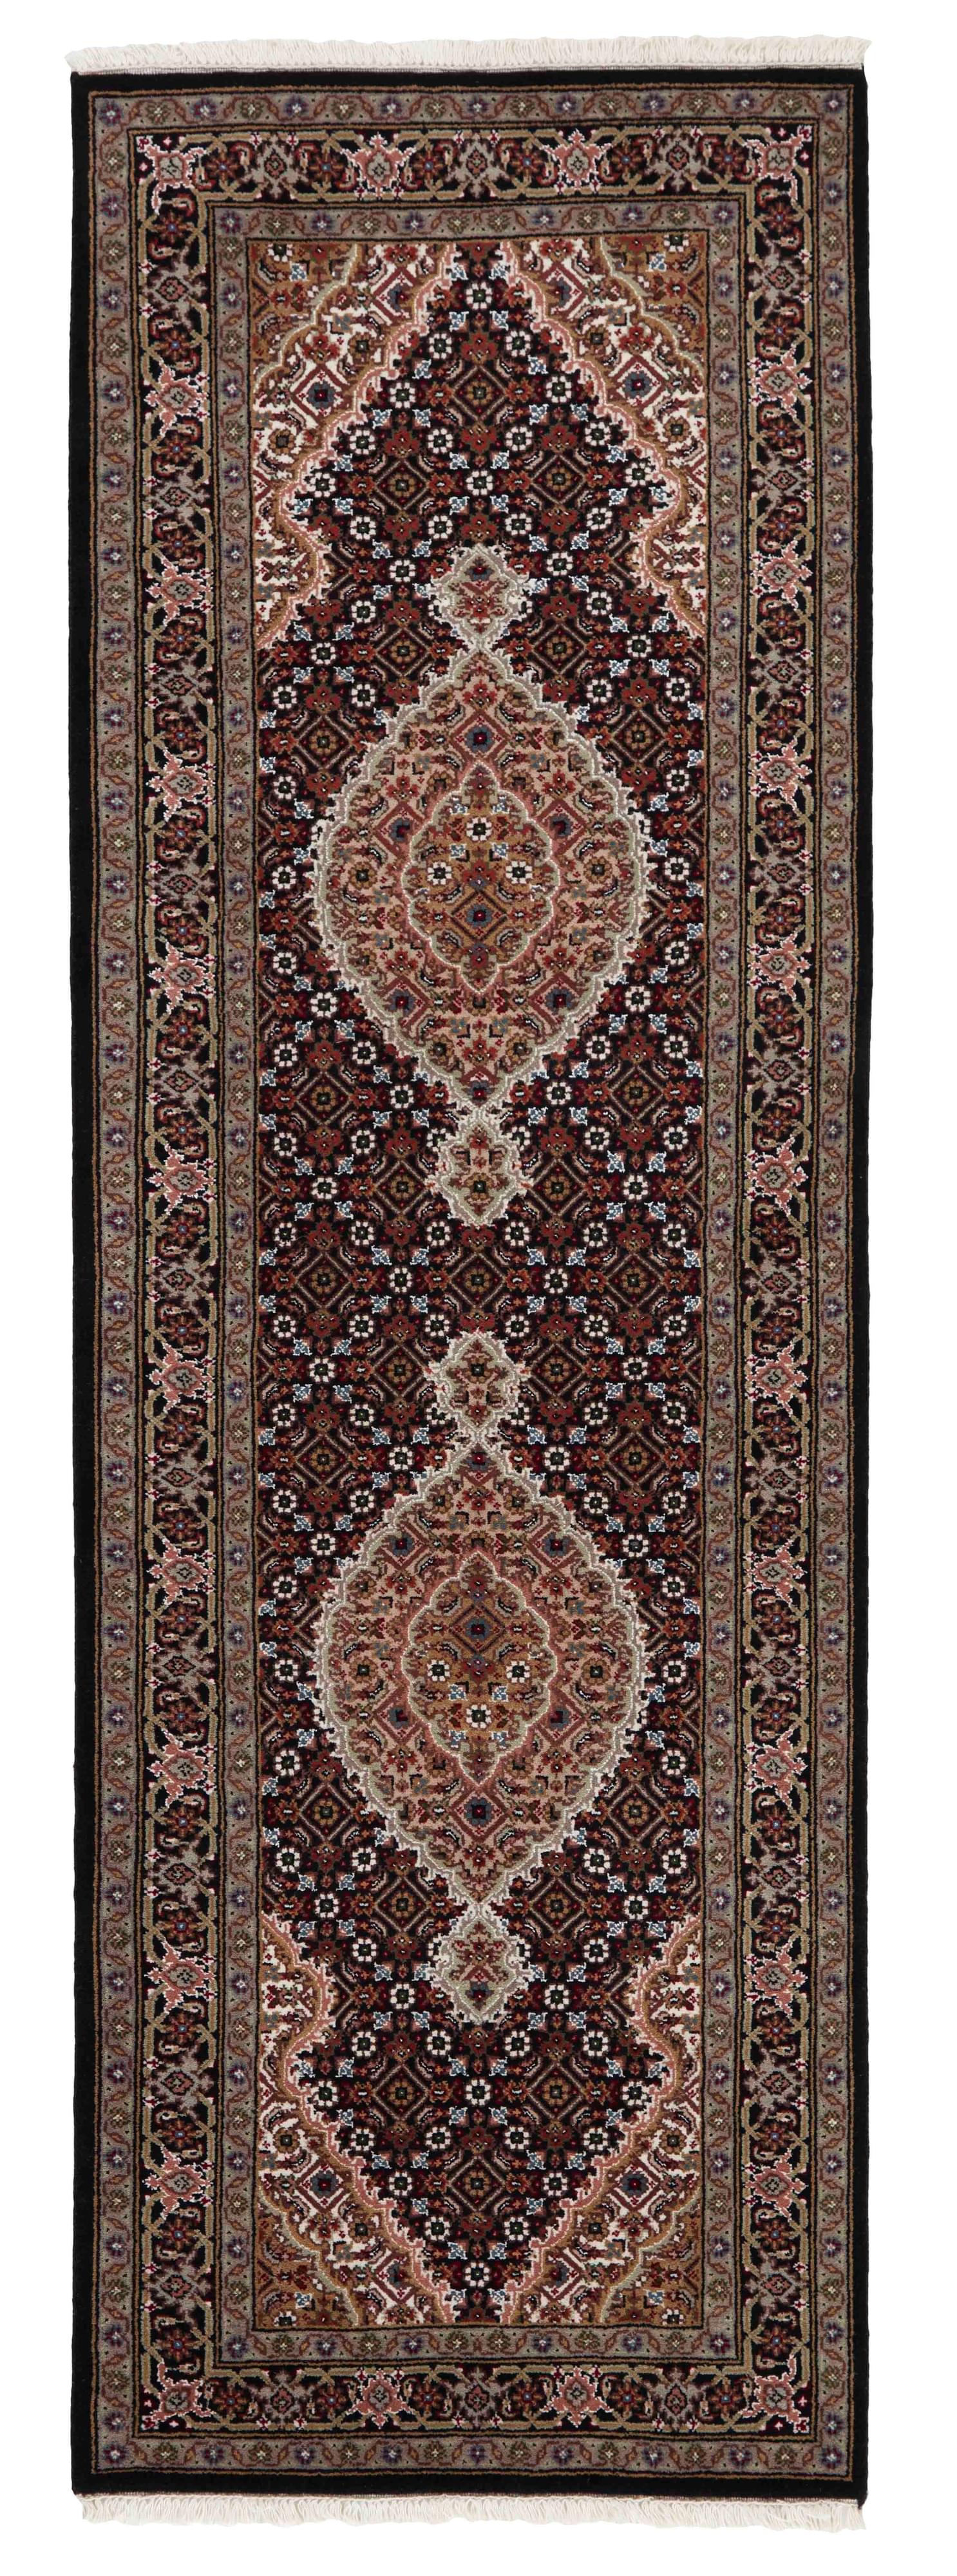 Authentic Oriental runner with traditional geometric and floral design in red, beige and black